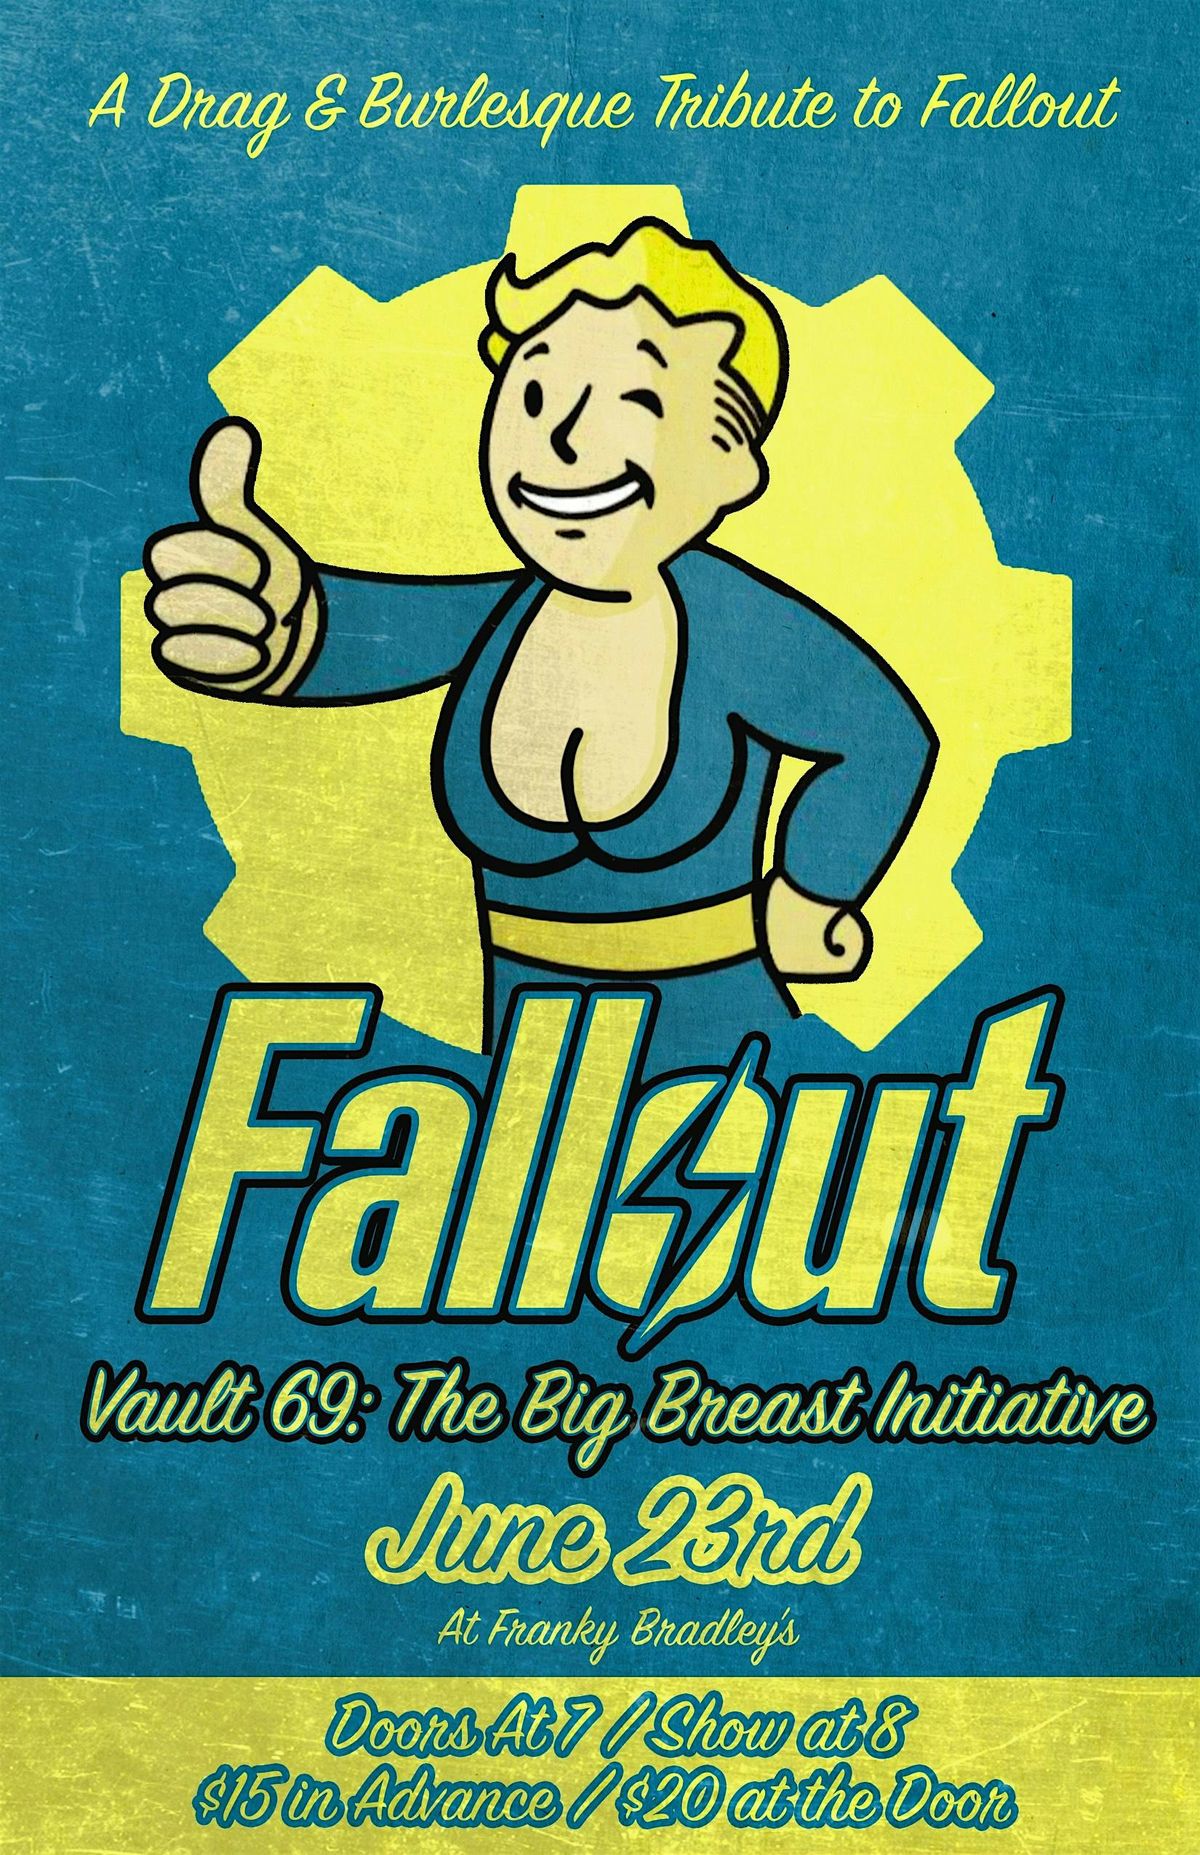 Fallout (Vault 69: The Breast Initiative)